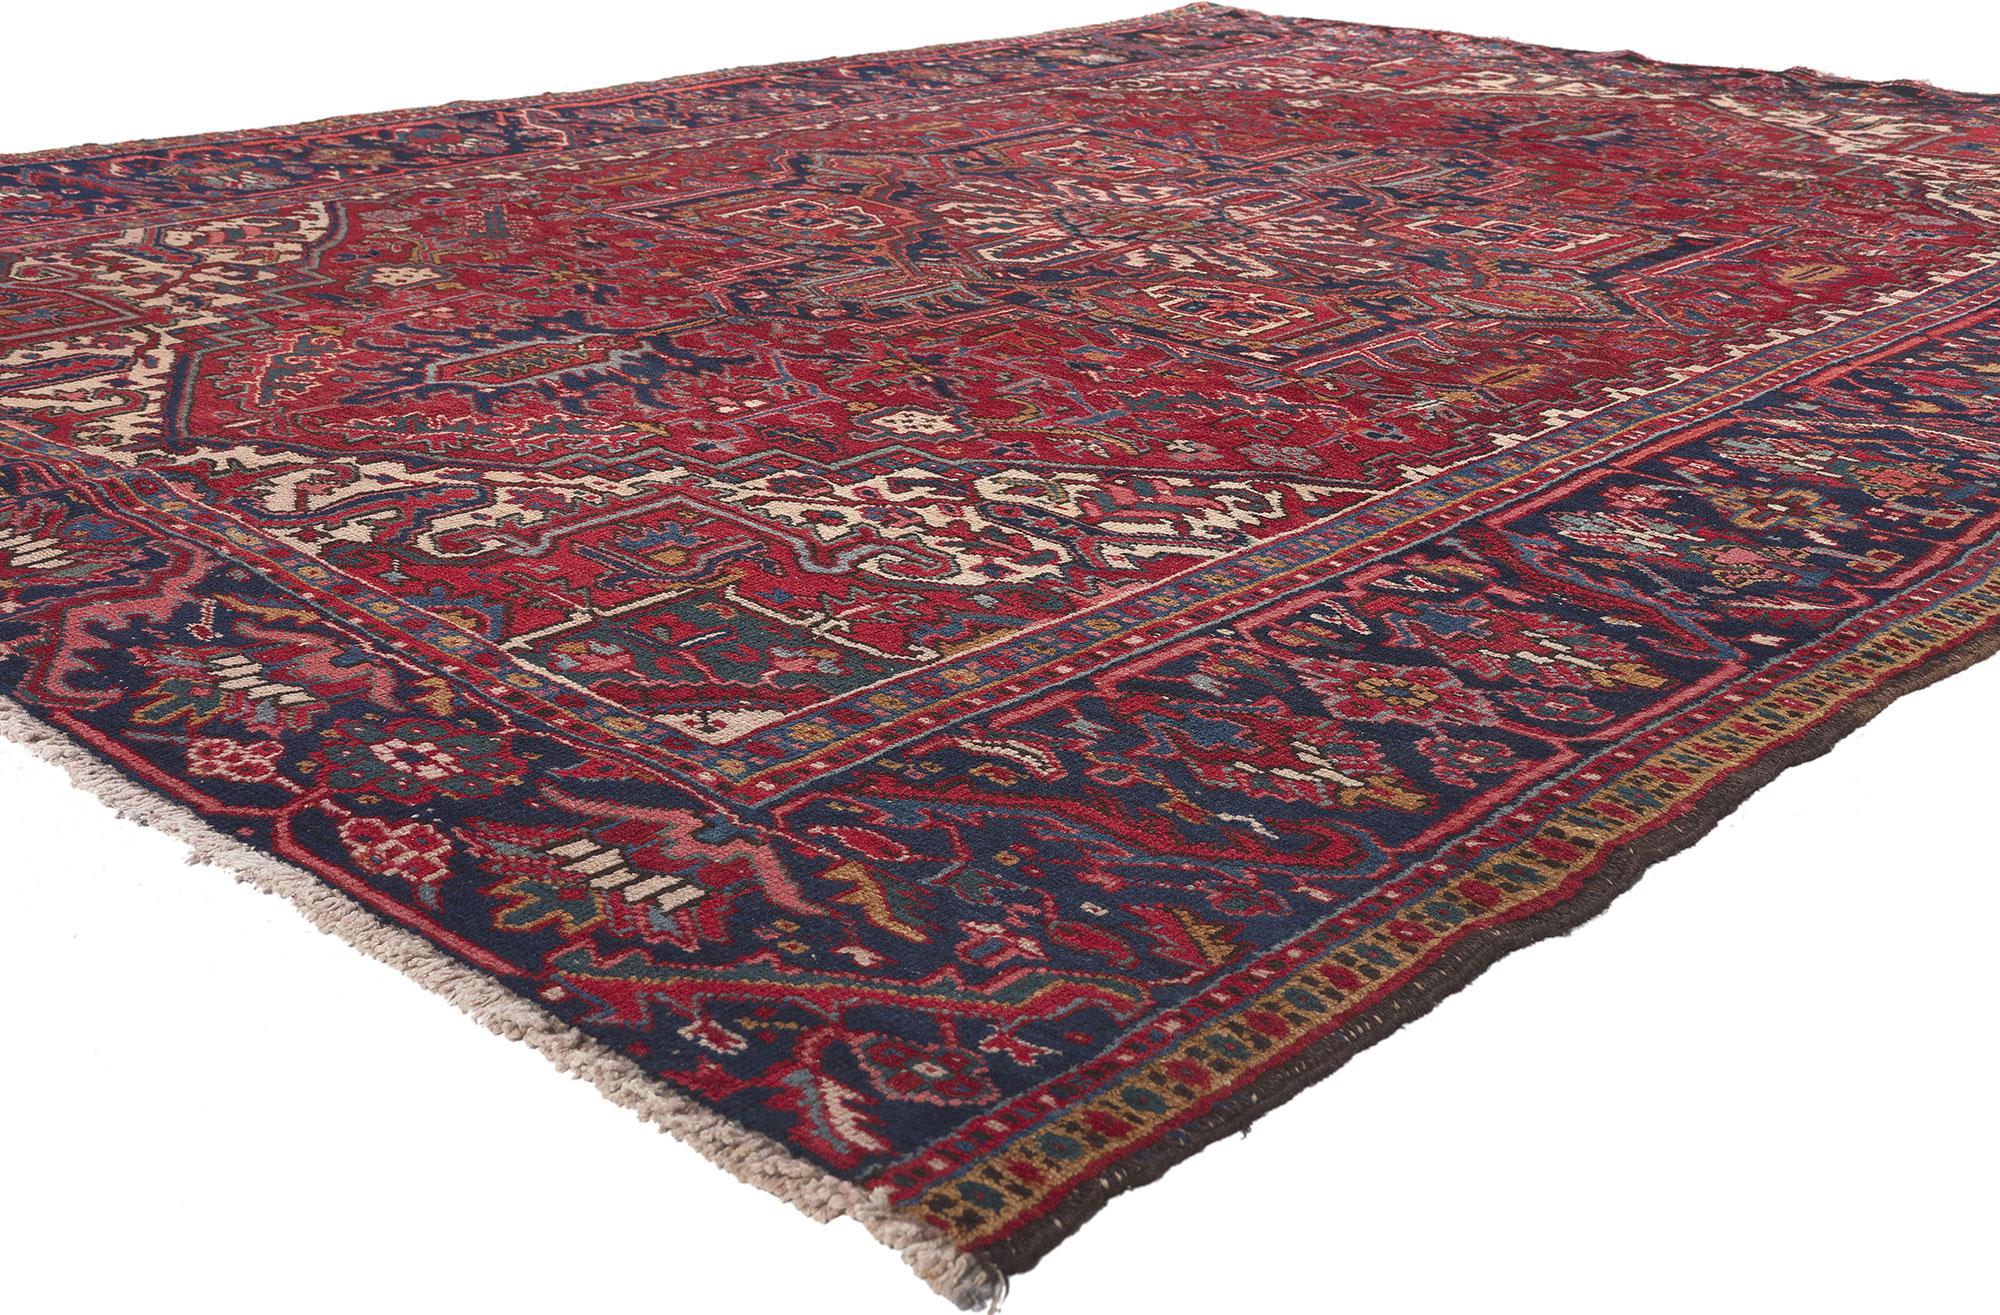 78157 Vintage Persian Heriz Rug, 08'00 x 10'05.
Warm and inviting with a timeless style, this vintage Persian Heriz rug charms with ease. The striking geometric design and refined color palette woven into this piece work together creating a classic